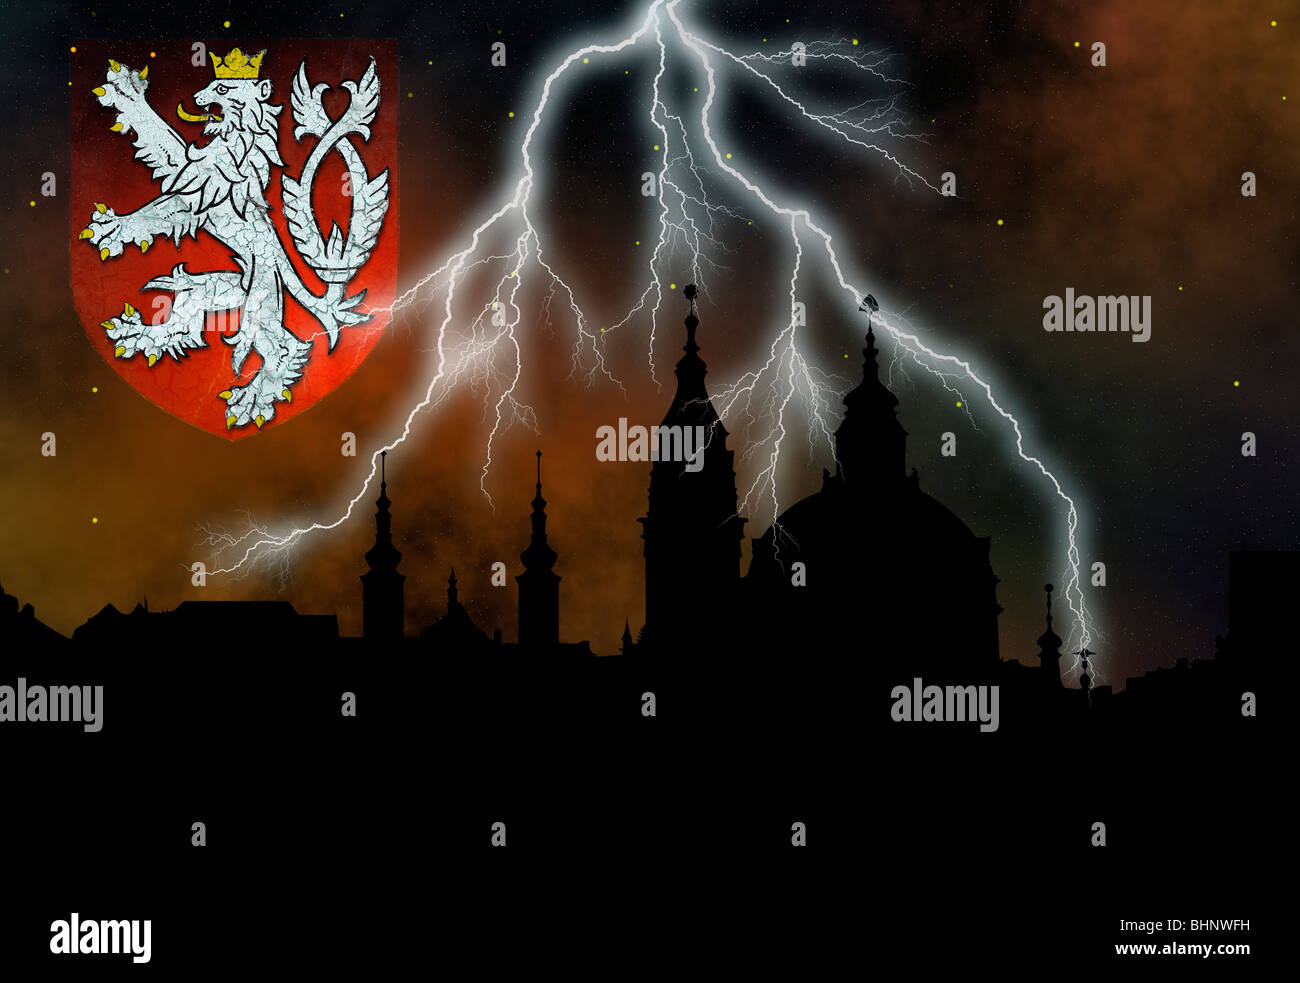 Outline of the St Nikolas church with national emblem of arms at stormy night Stock Photo